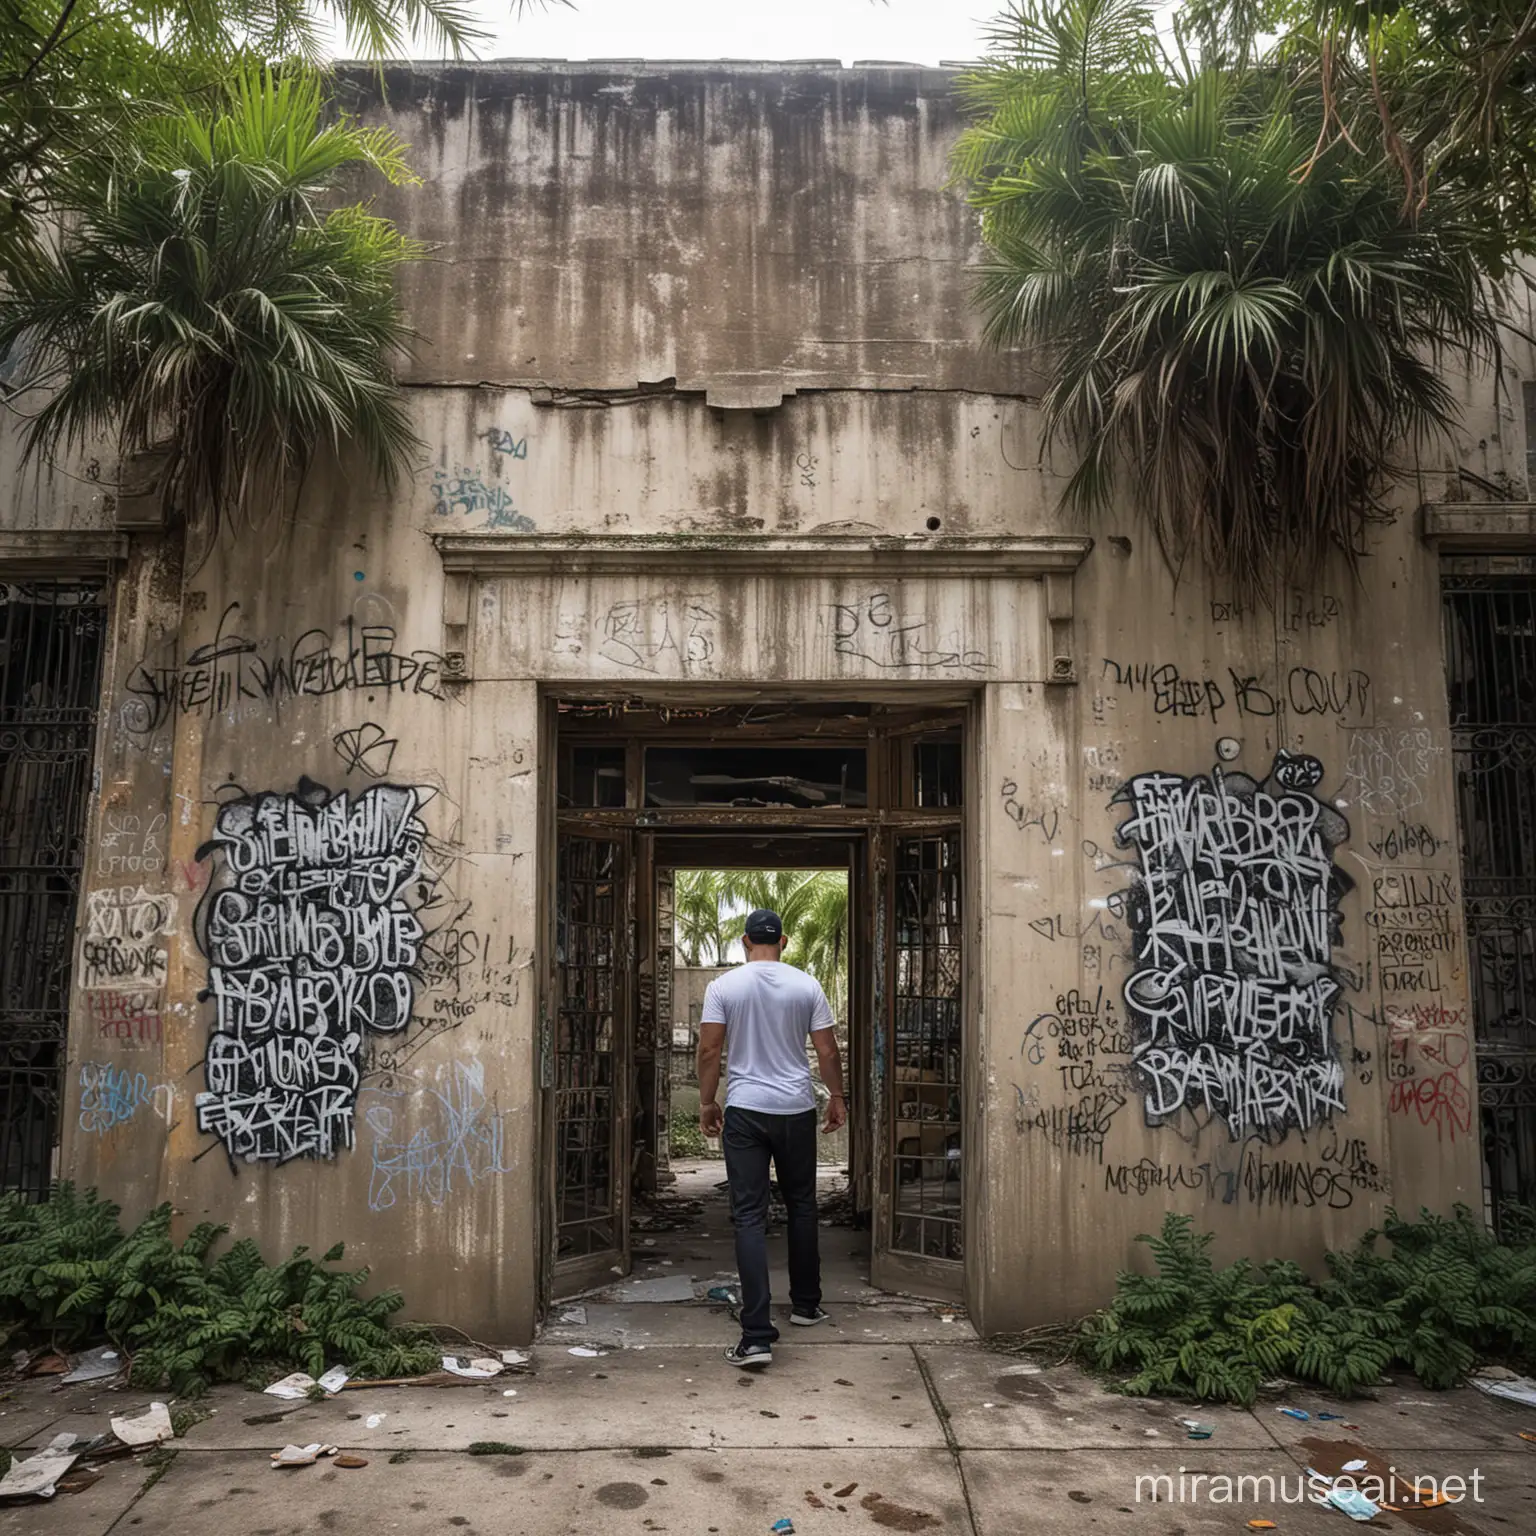 Man stumbles upon the crumbling edifice of the hidden library in Miami Florida—a dilapidated structure hidden behind a veil of graffiti and urban decay, its presence pulsing with dark energy and mushrooms